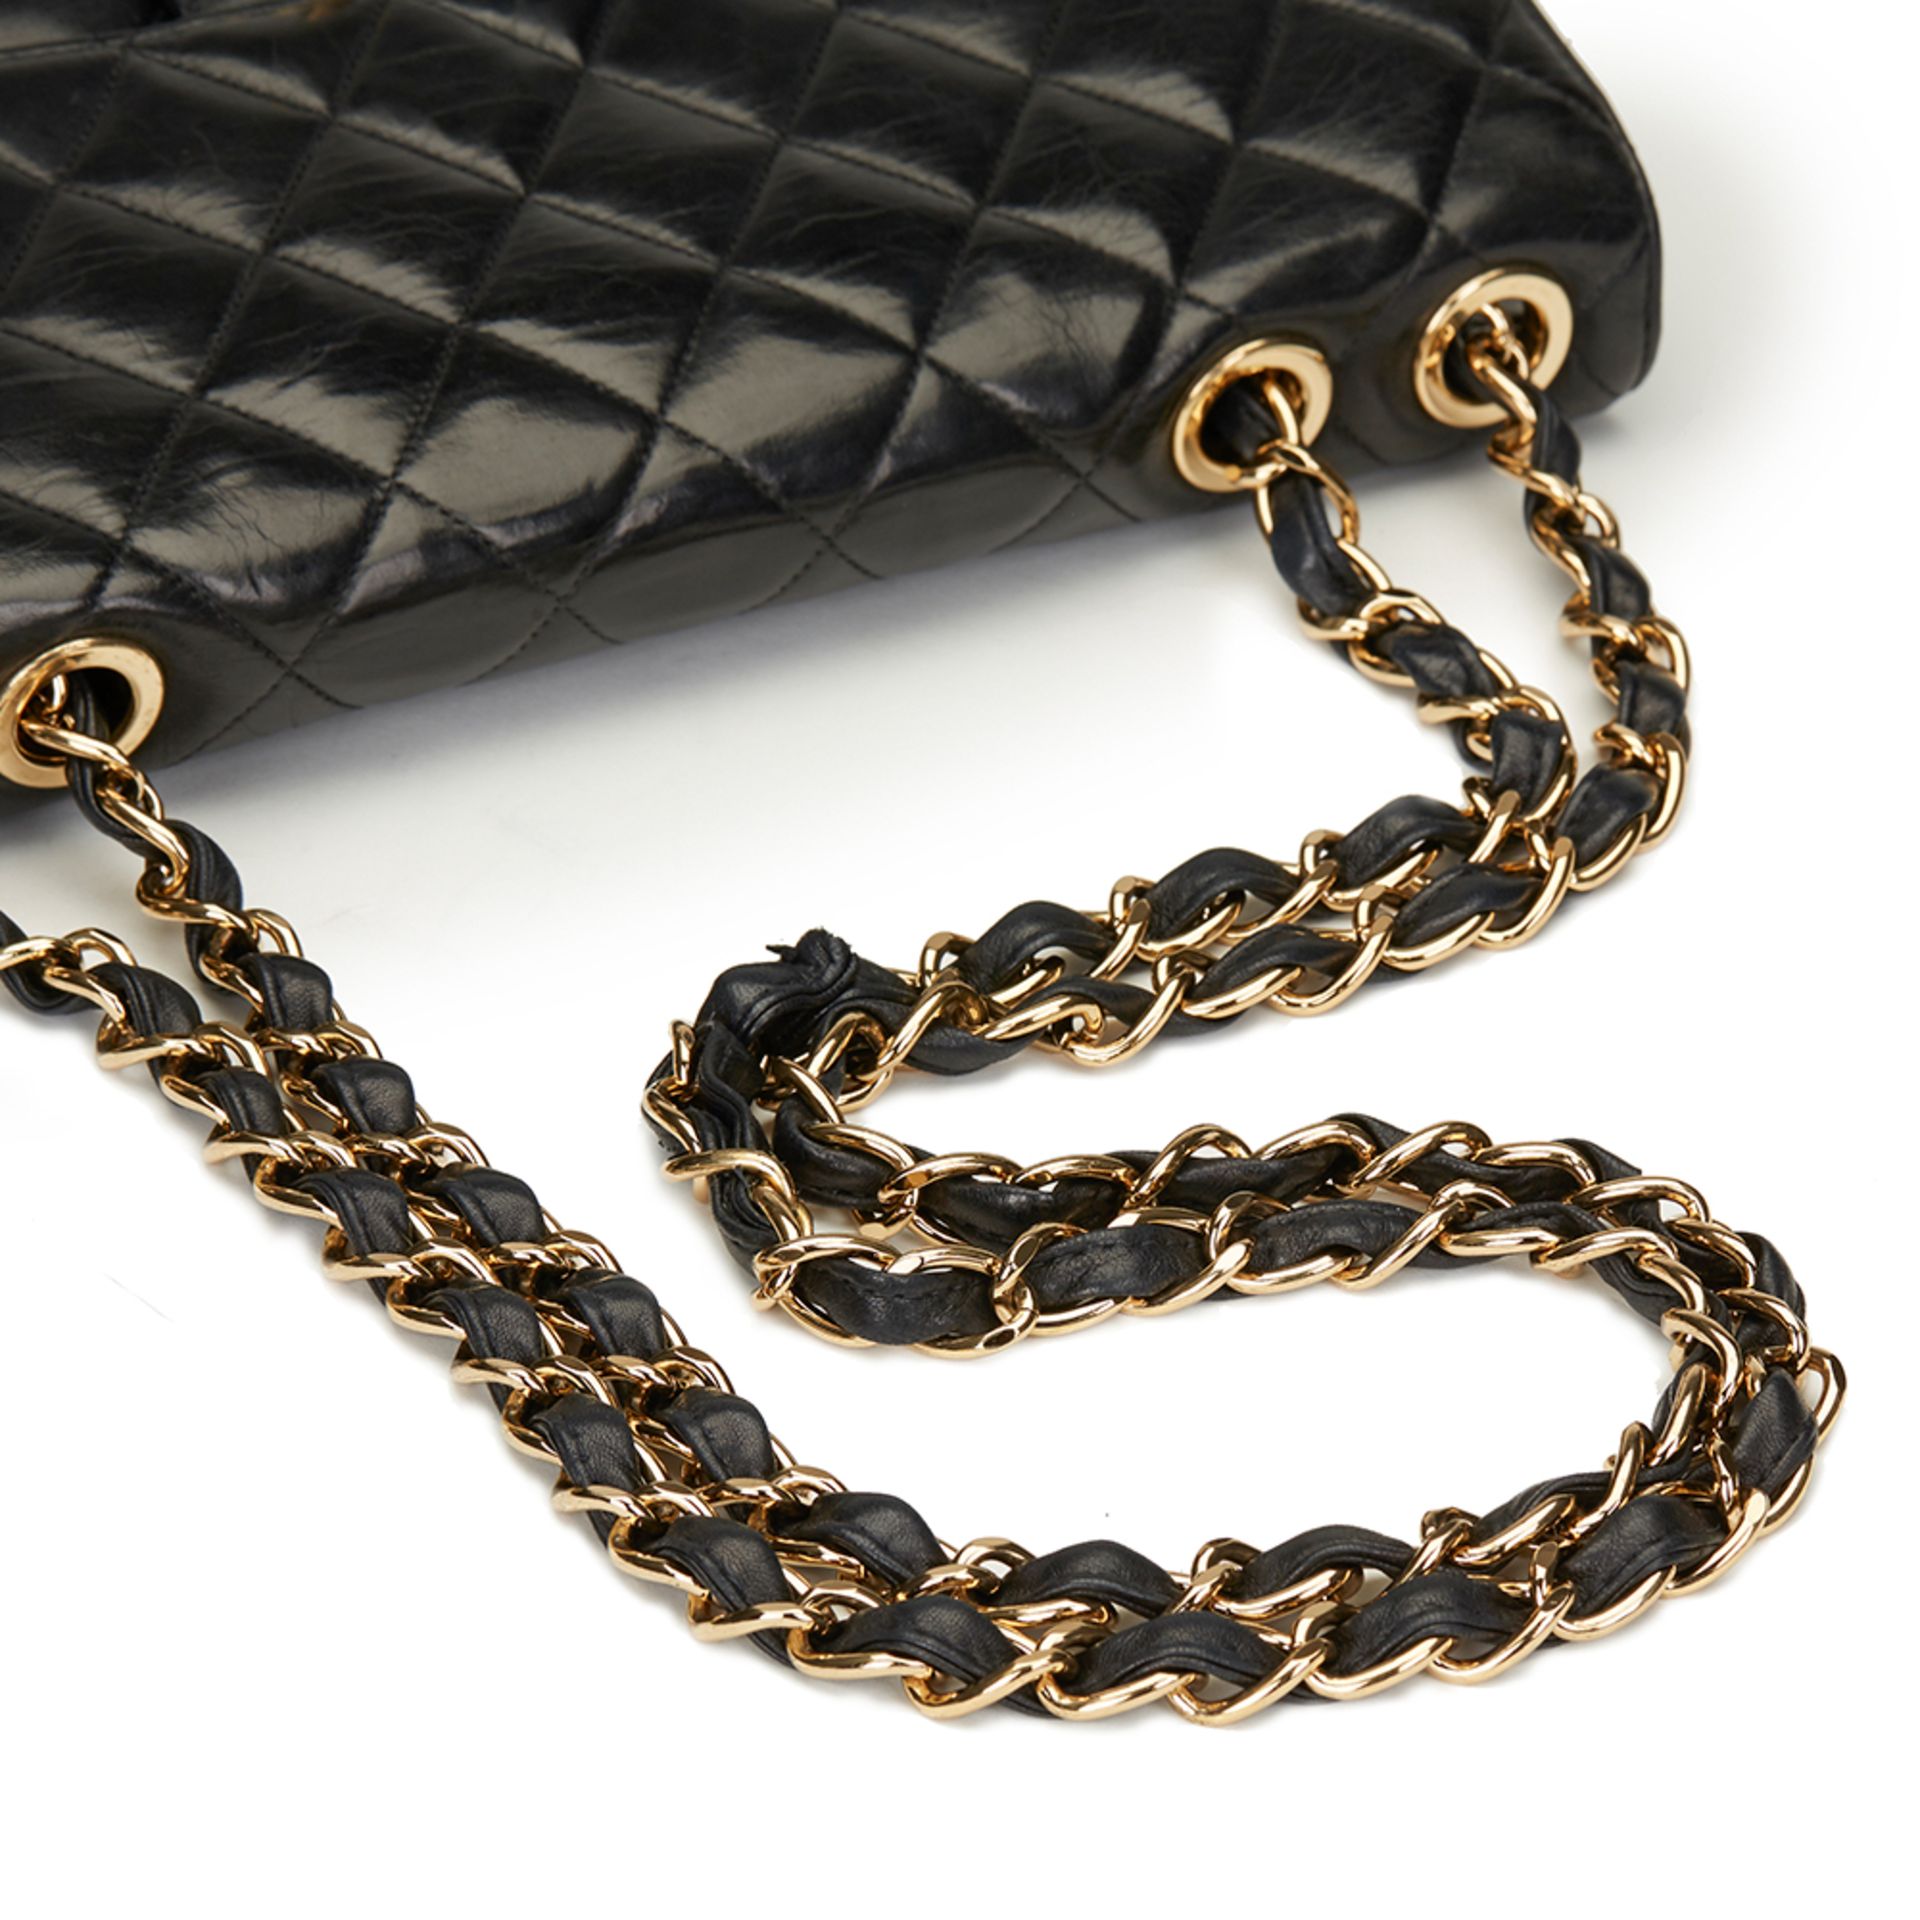 Chanel Black Quilted Lambskin Jumbo Classic Single Flap Bag - Image 7 of 11